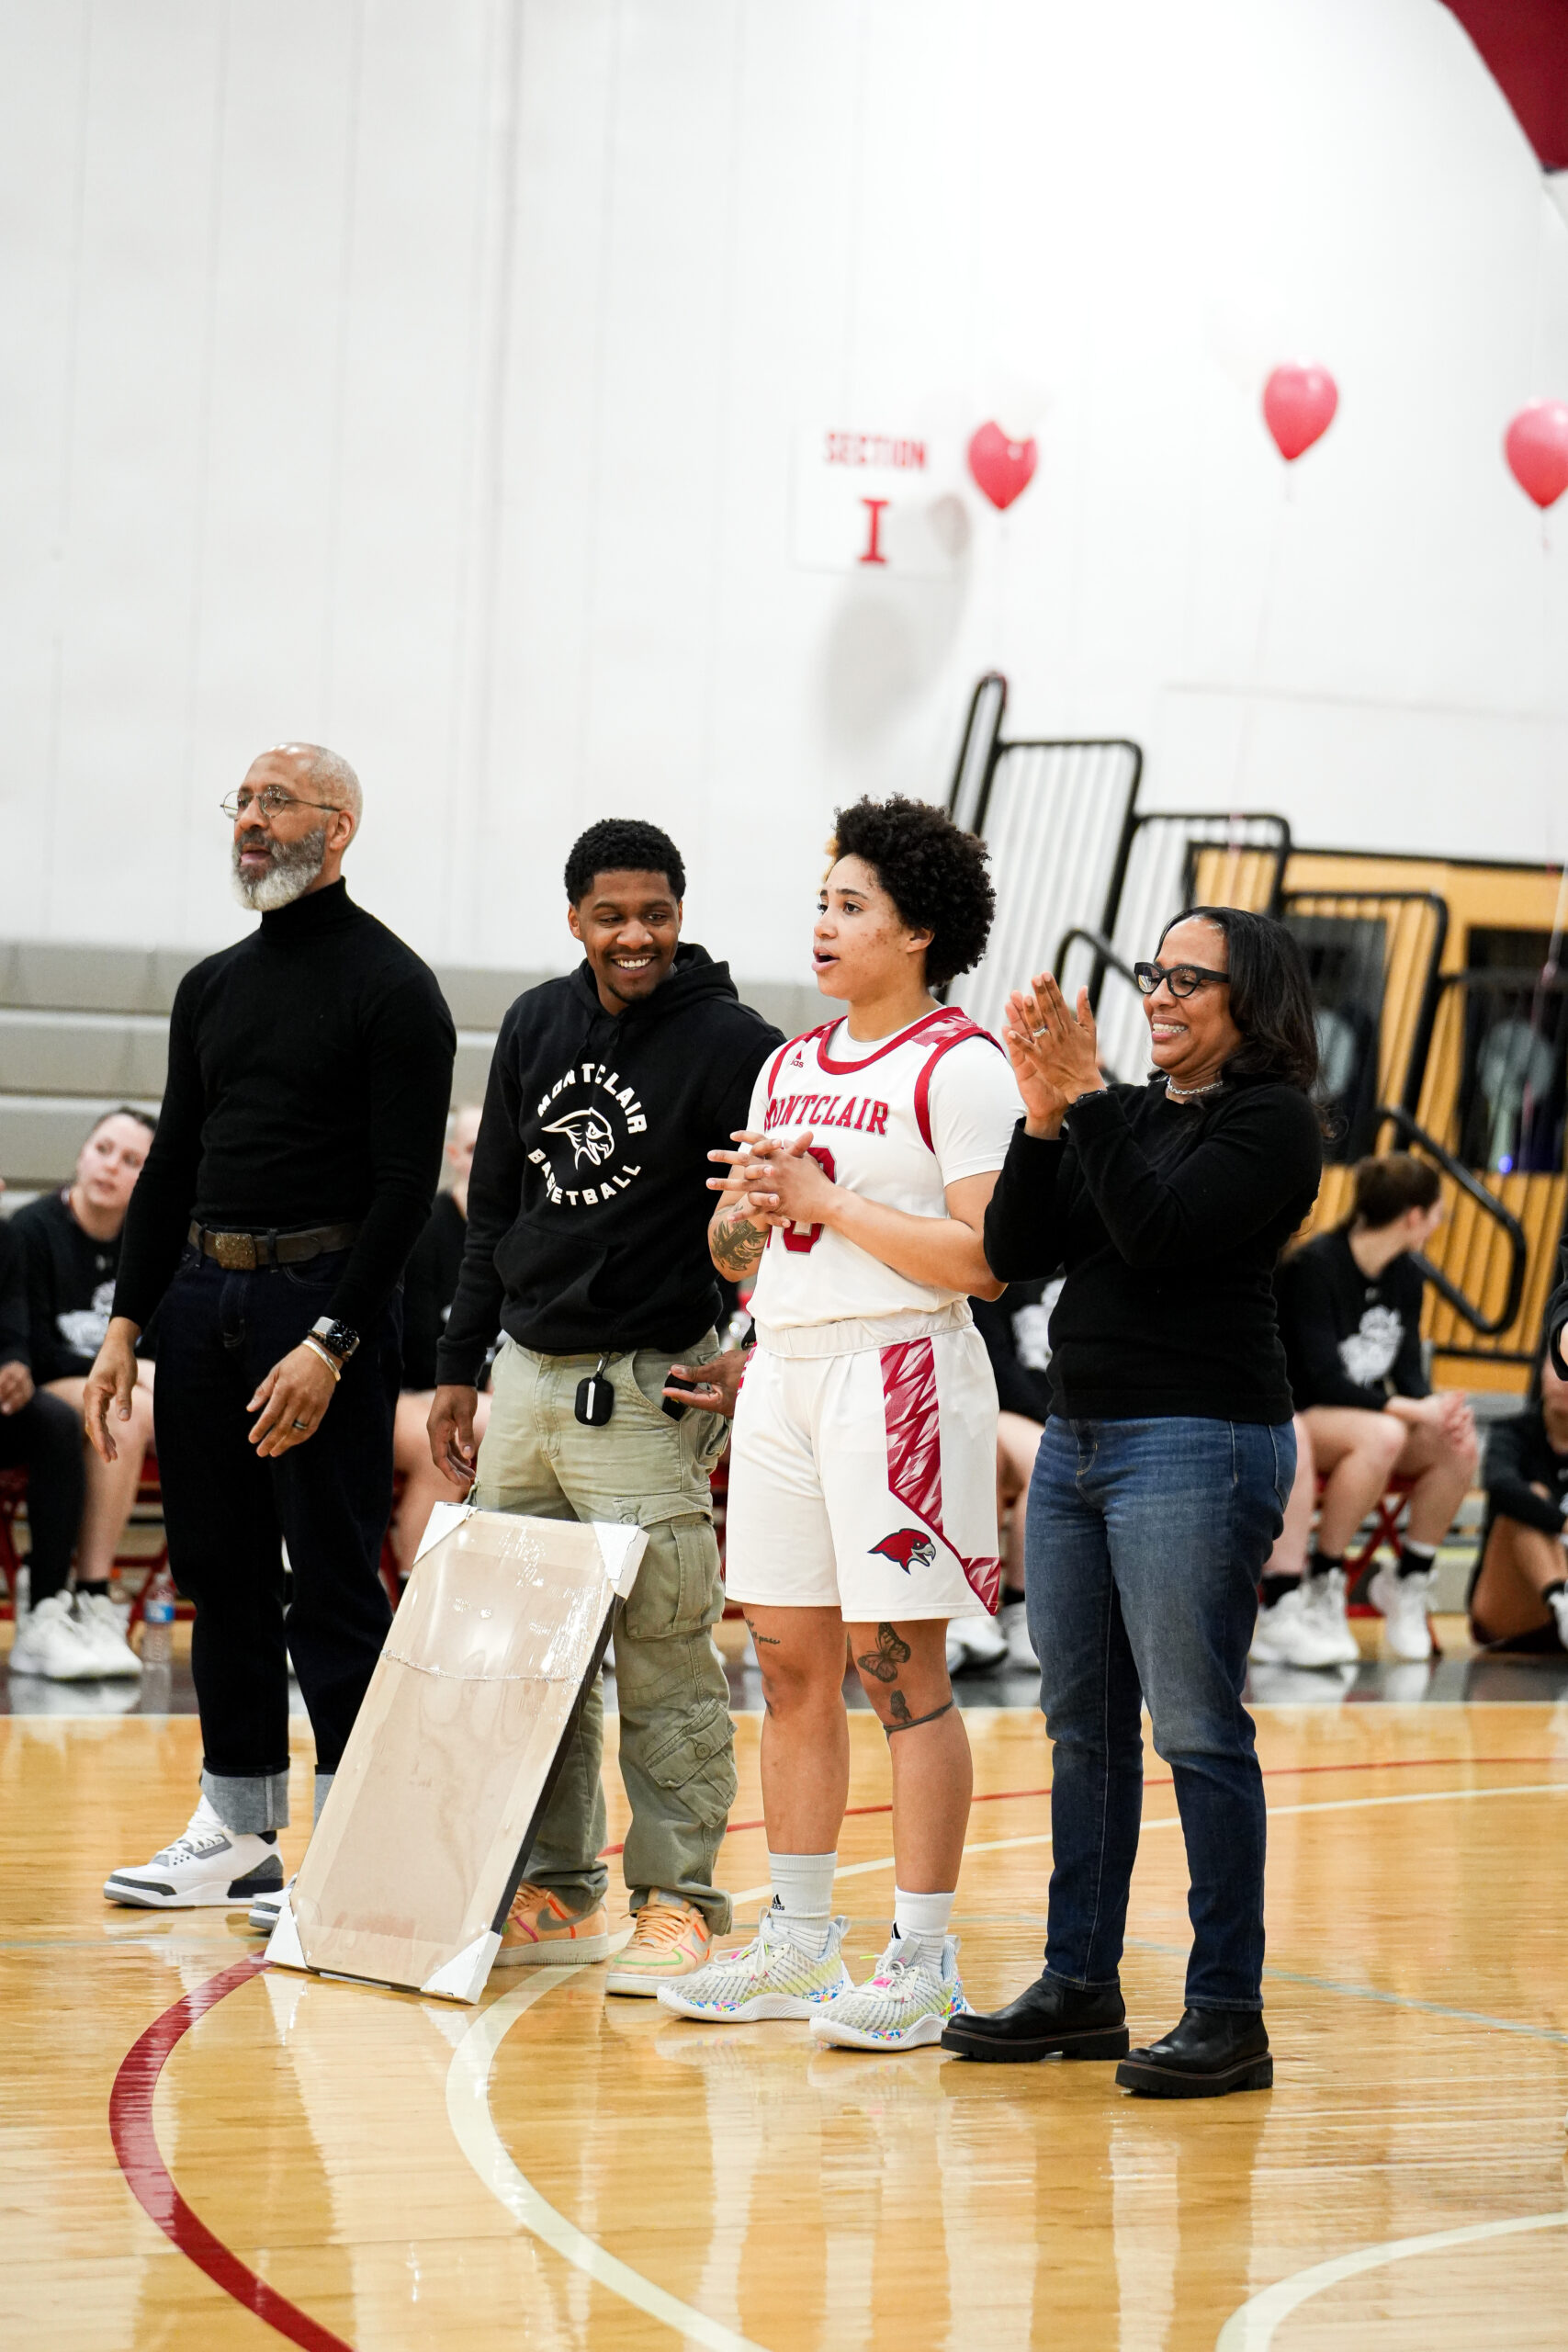 Senior guard Kendall Hodges being honored on senior night with her family. Lloyd Odimegwu | The Montclarion